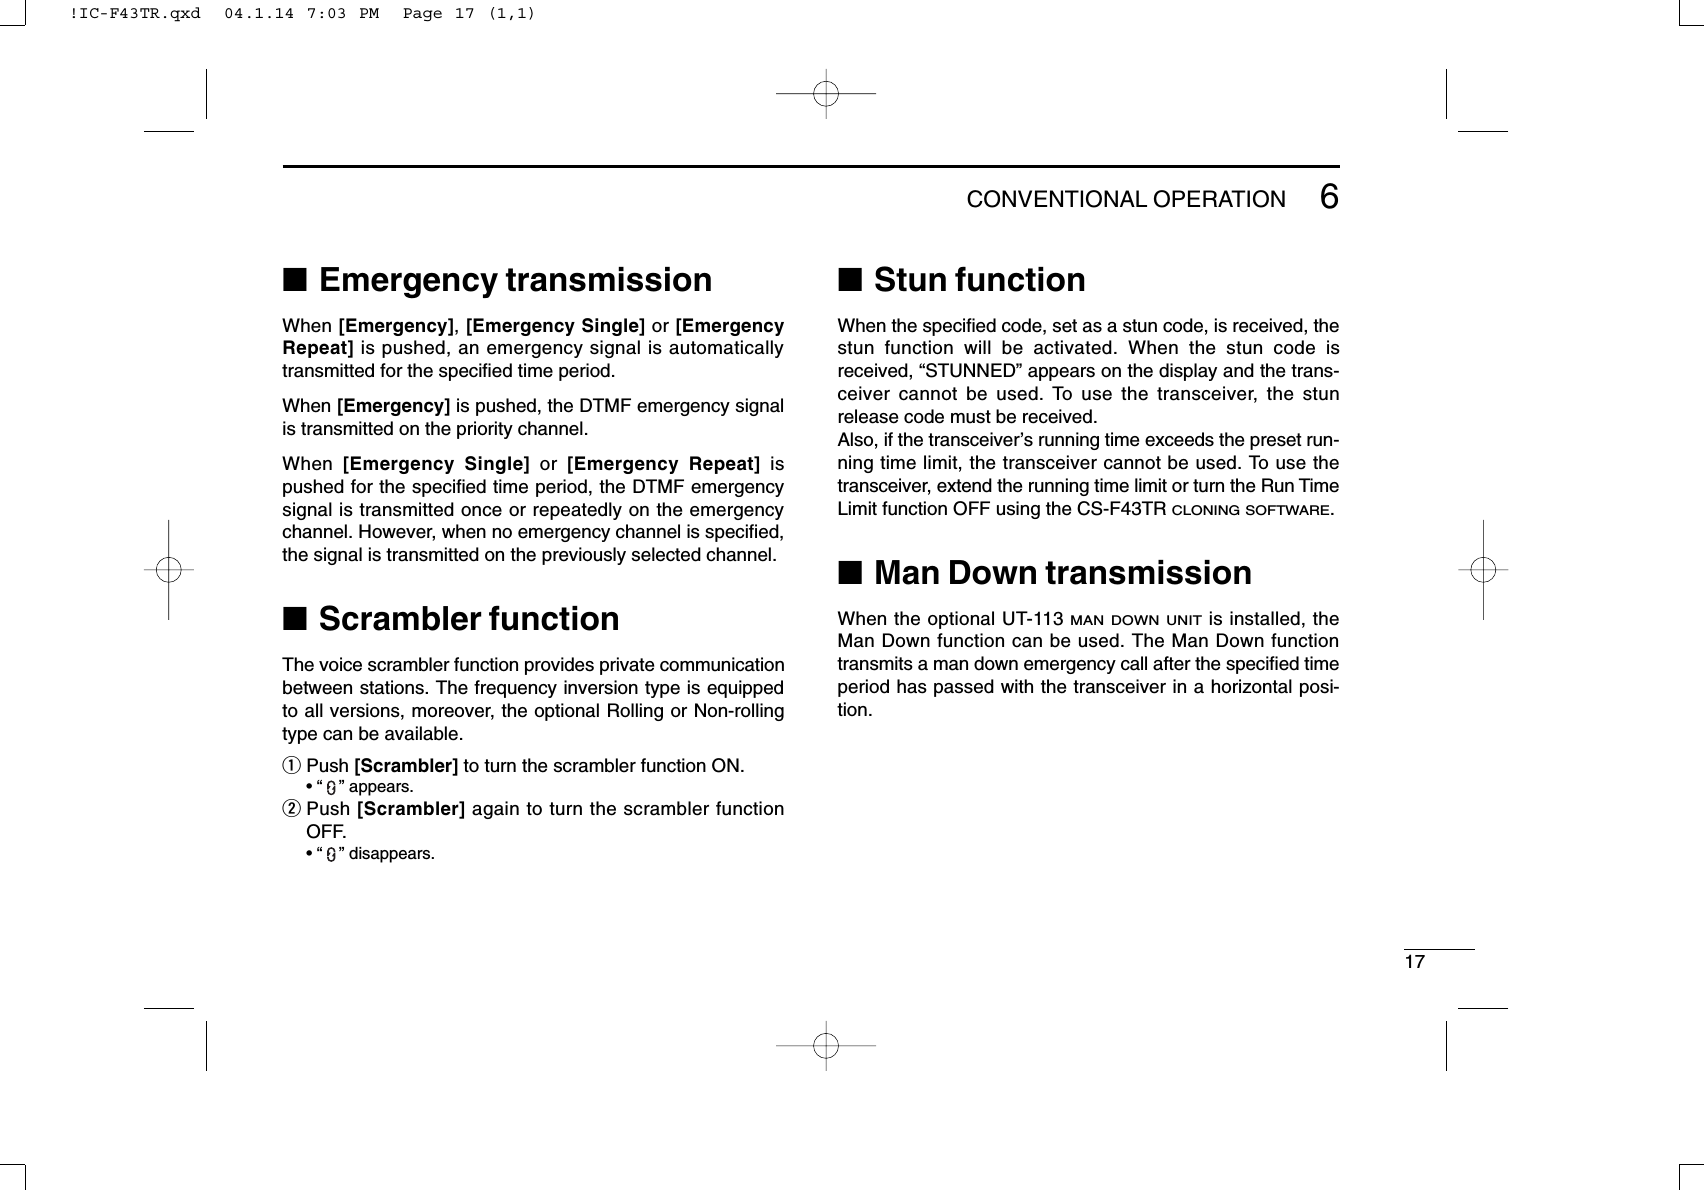 176CONVENTIONAL OPERATION■Emergency transmissionWhen [Emergency], [Emergency Single] or [EmergencyRepeat] is pushed, an emergency signal is automaticallytransmitted for the speciﬁed time period.When [Emergency] is pushed, the DTMF emergency signalis transmitted on the priority channel.When  [Emergency Single] or  [Emergency Repeat] ispushed for the speciﬁed time period, the DTMF emergencysignal is transmitted once or repeatedly on the emergencychannel. However, when no emergency channel is speciﬁed,the signal is transmitted on the previously selected channel.■Scrambler functionThe voice scrambler function provides private communicationbetween stations. The frequency inversion type is equippedto all versions, moreover, the optional Rolling or Non-rollingtype can be available.qPush [Scrambler] to turn the scrambler function ON.• “” appears.wPush [Scrambler] again to turn the scrambler functionOFF.• “” disappears.■Stun functionWhen the speciﬁed code, set as a stun code, is received, thestun function will be activated. When the stun code isreceived, “STUNNED” appears on the display and the trans-ceiver cannot be used. To use the transceiver, the stunrelease code must be received.Also, if the transceiver’s running time exceeds the preset run-ning time limit, the transceiver cannot be used. To use thetransceiver, extend the running time limit or turn the Run TimeLimit function OFF using the CS-F43TR CLONING SOFTWARE.■Man Down transmissionWhen the optional UT-113 MAN DOWN UNITis installed, theMan Down function can be used. The Man Down functiontransmits a man down emergency call after the speciﬁed timeperiod has passed with the transceiver in a horizontal posi-tion.!IC-F43TR.qxd  04.1.14 7:03 PM  Page 17 (1,1)